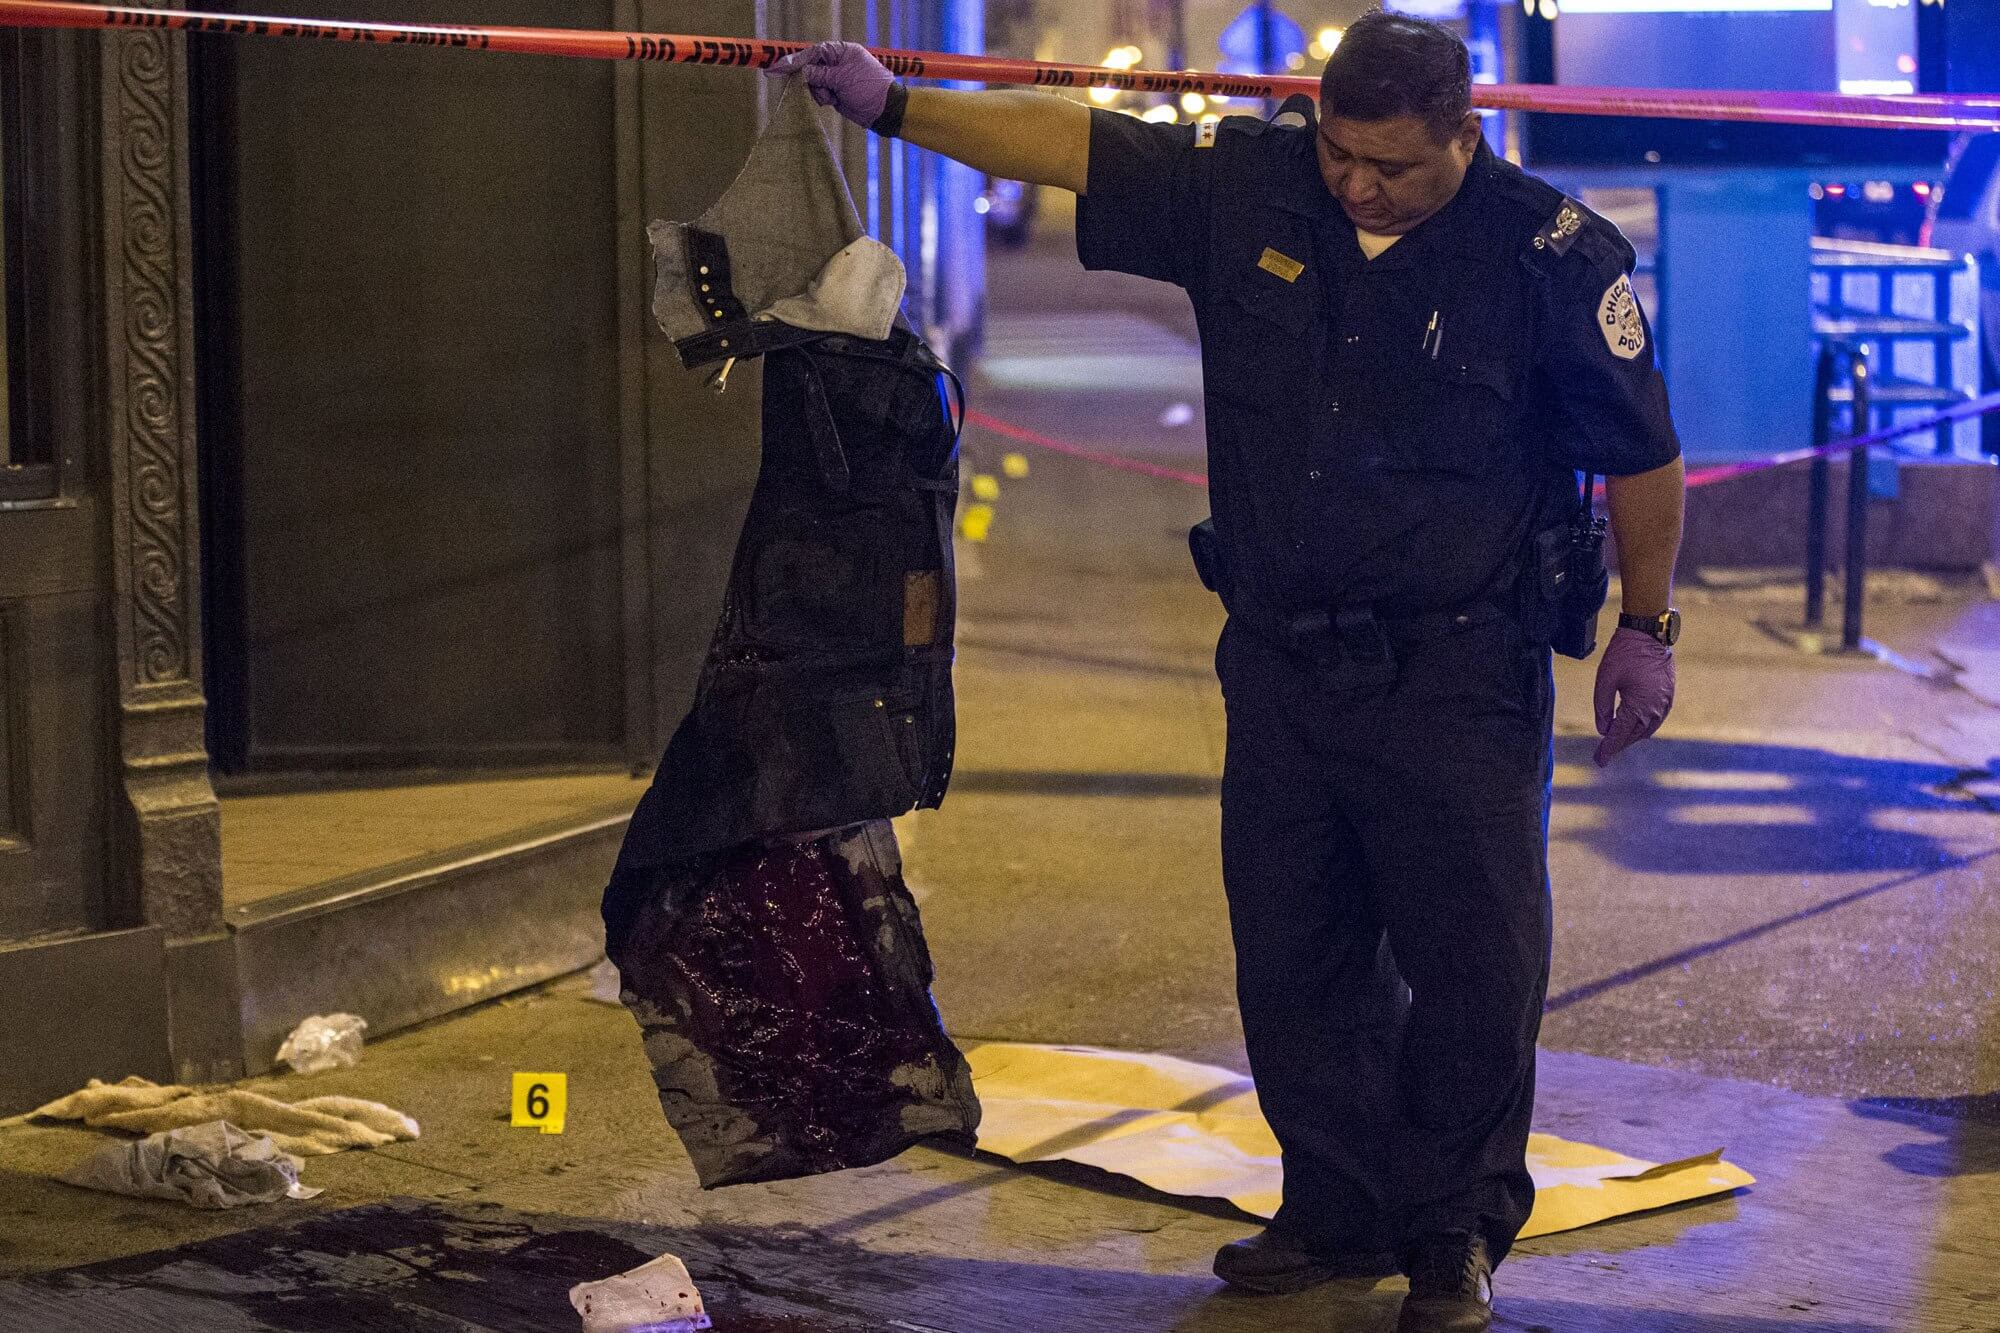 A police officer in Chicago, Illinois inspects bloody clothing belonging to a gunshot victim.